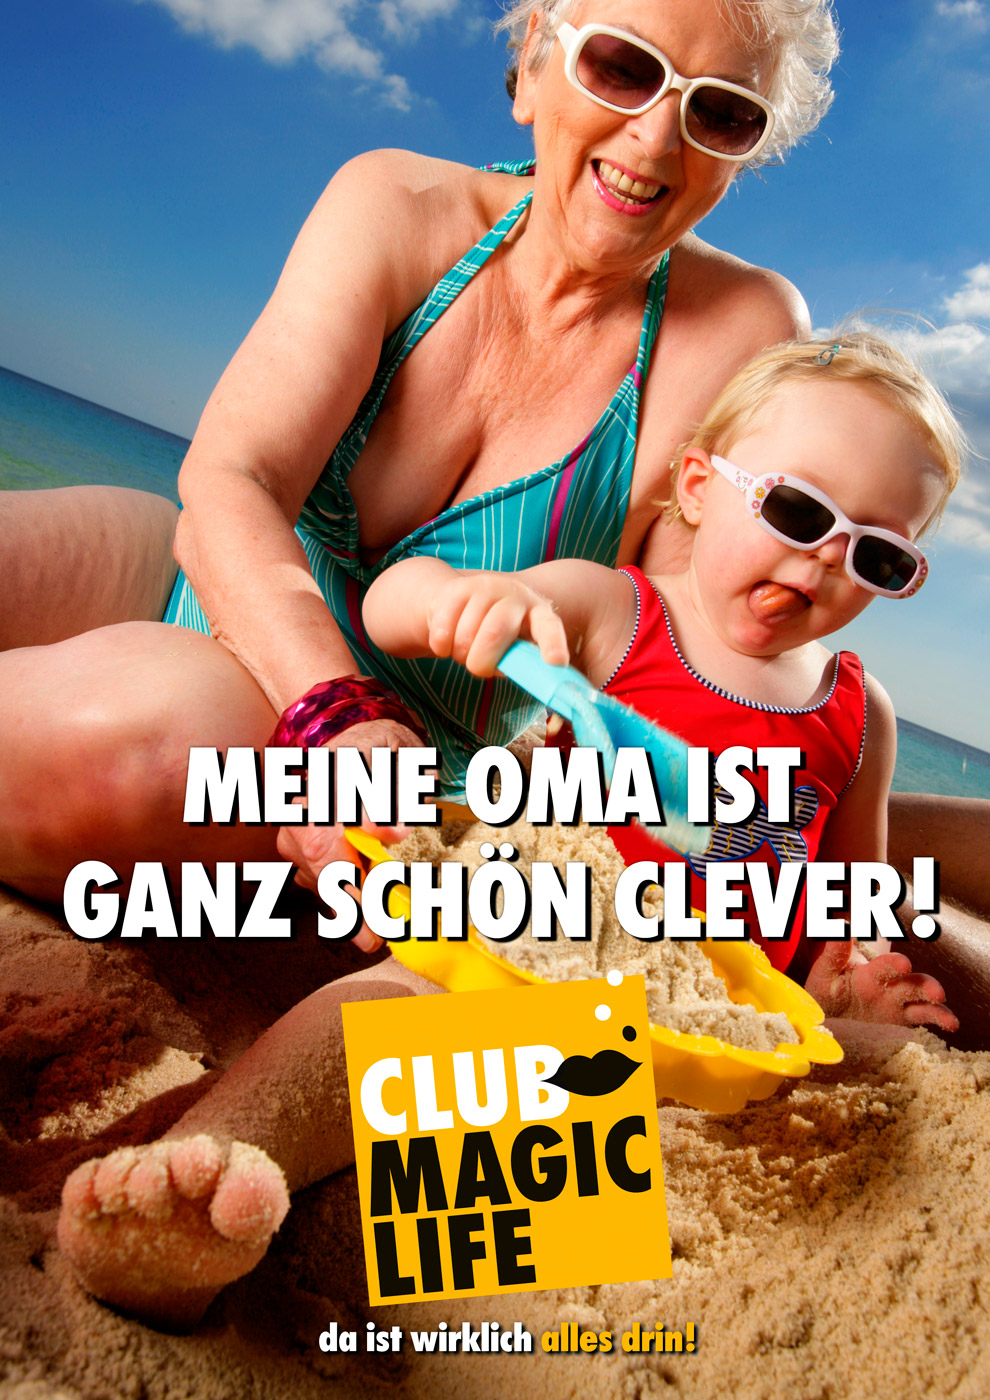 magiclife-anzeige-9